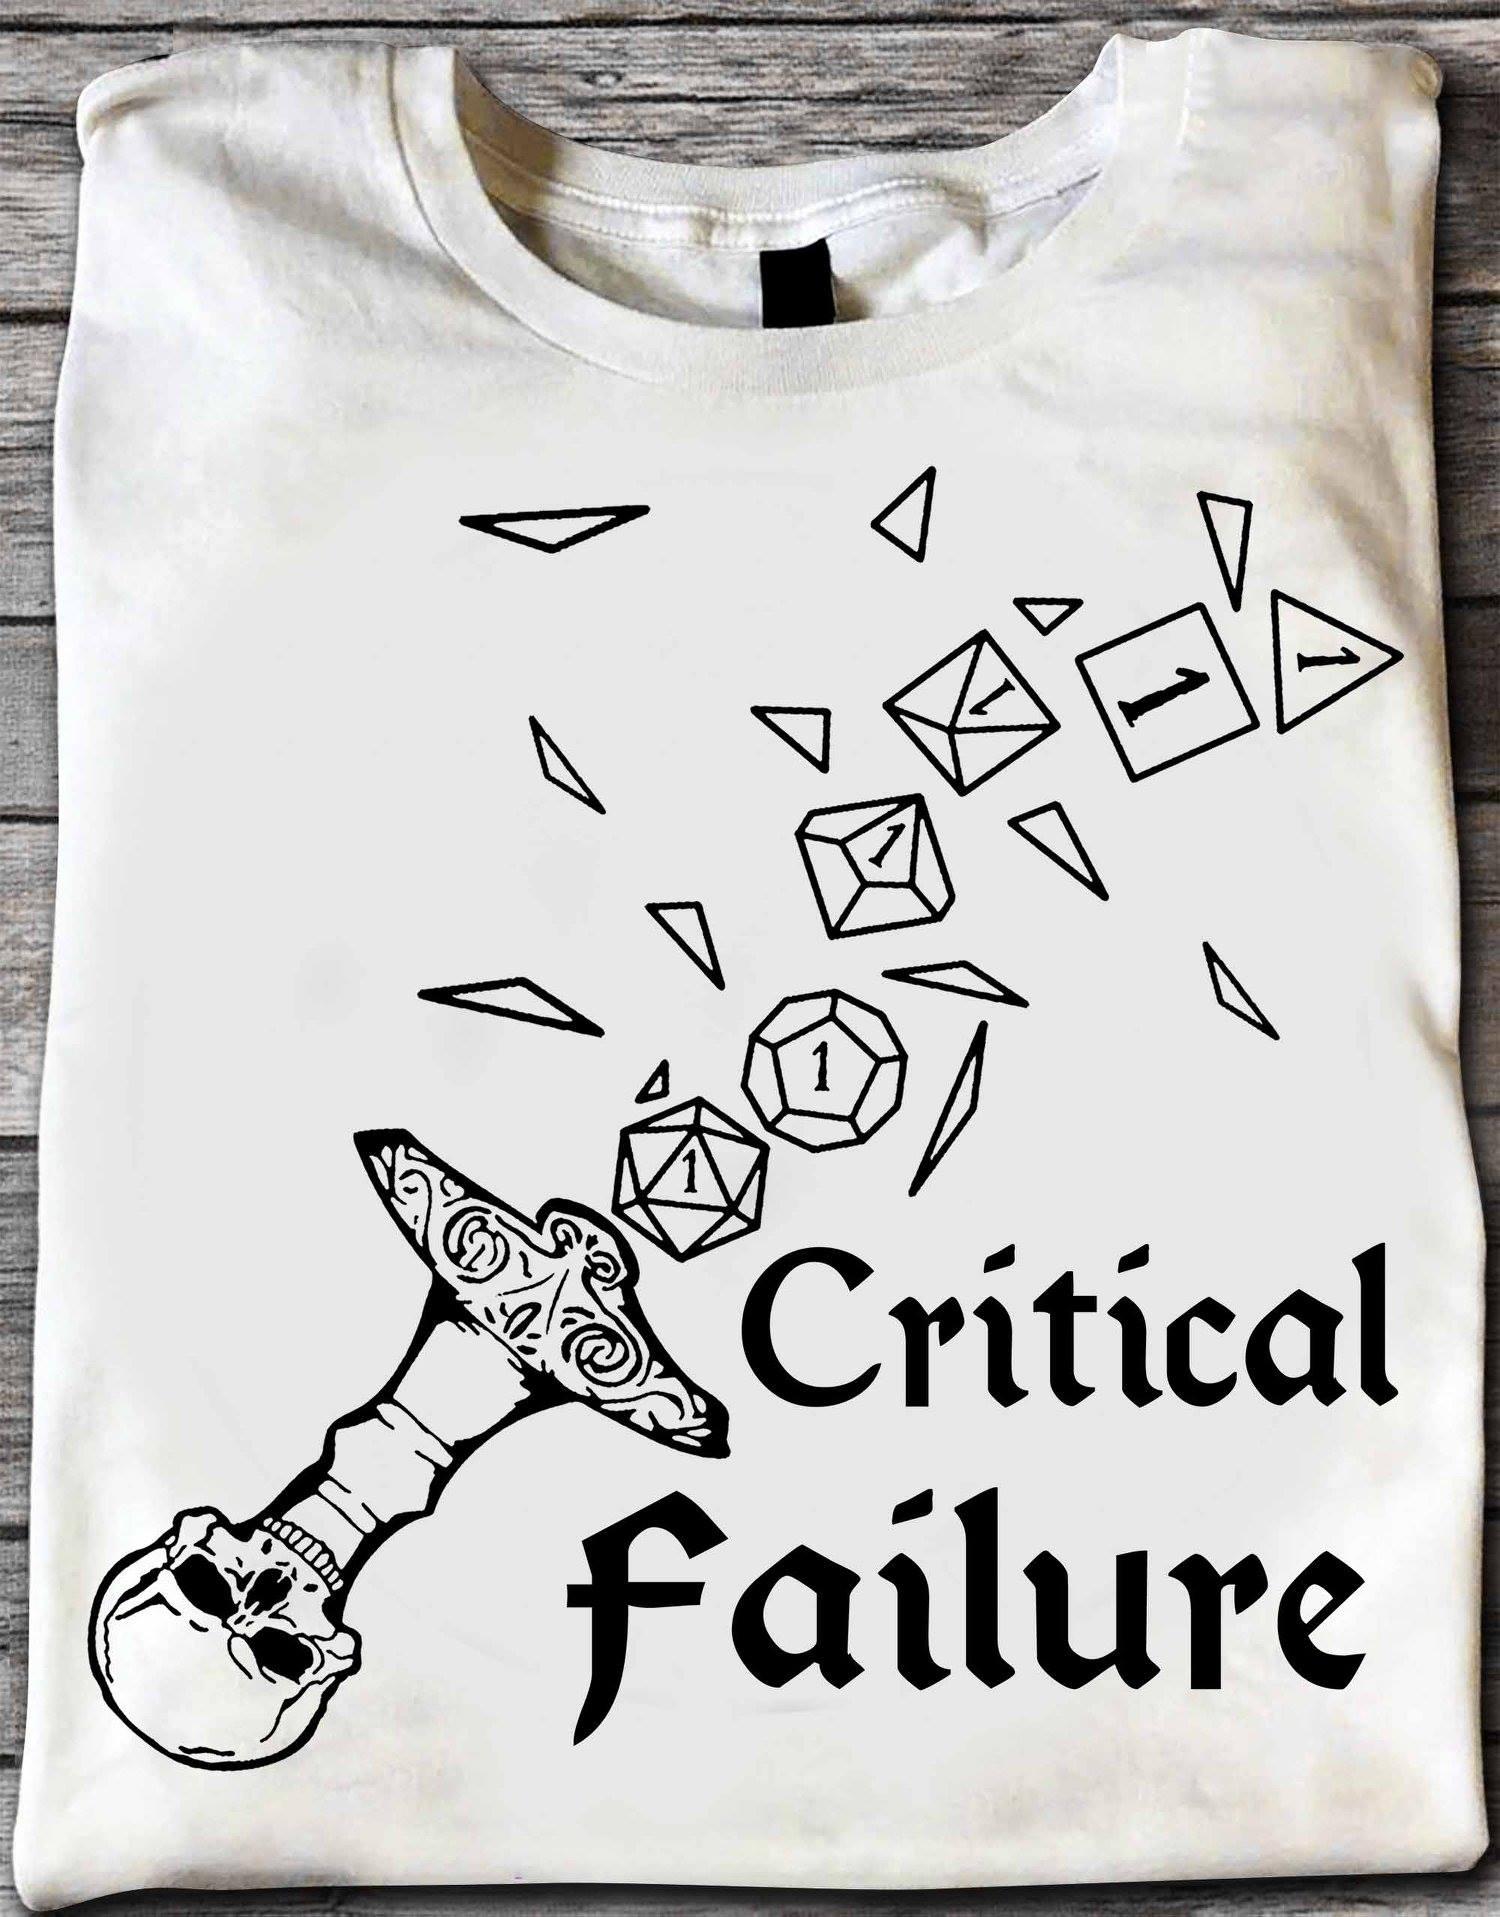 Critical failure - Dungeons and Dragons, rolling initiatives